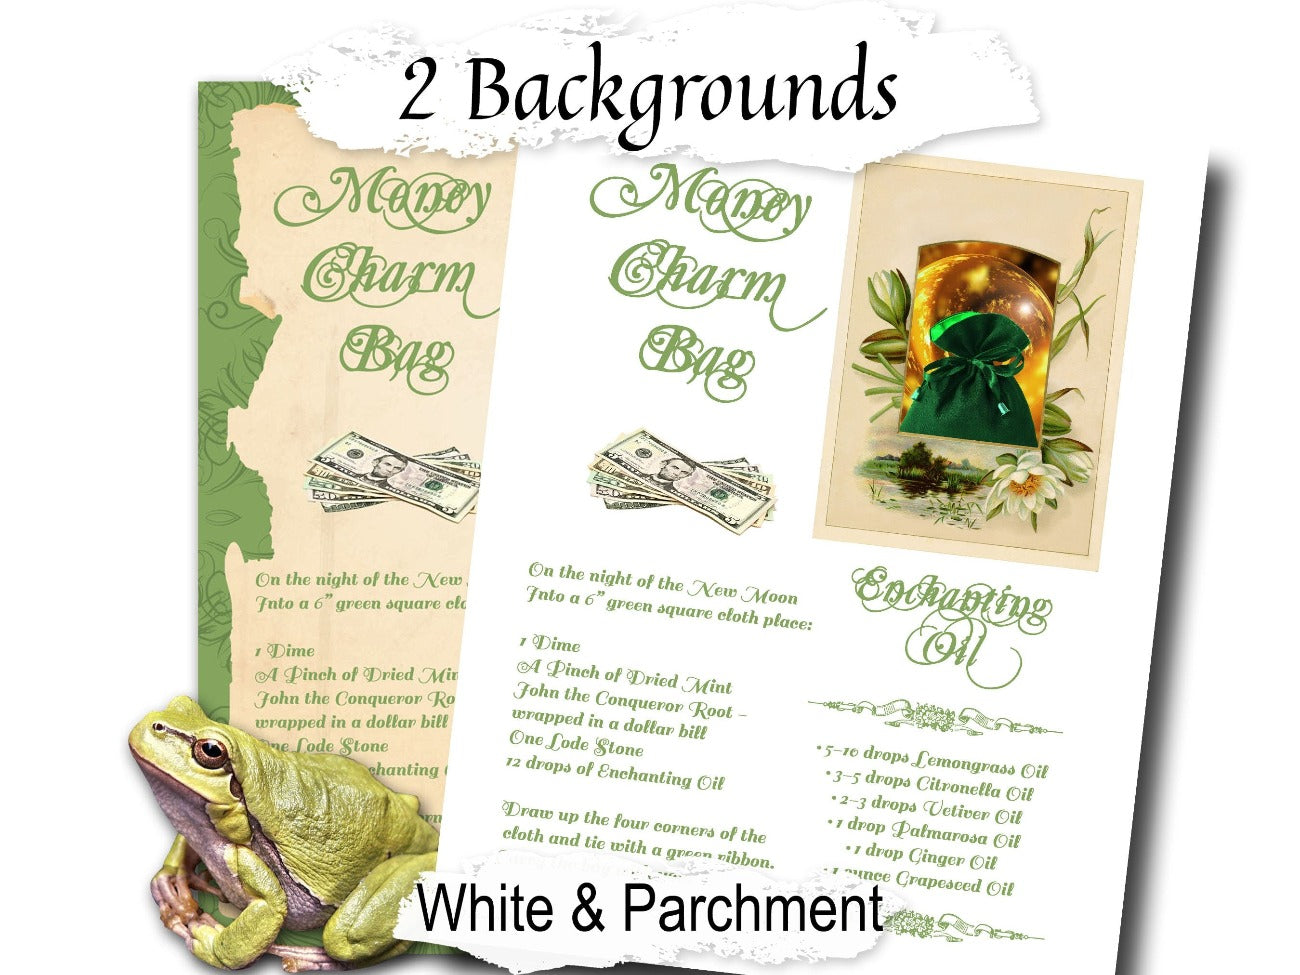 MONEY CHARM BAG, Create Wealth Spell Recipe, Bring Prosperity, Wicca Witchcraft Abundance Attract Money, Green Witch Apothecary Printable - Morgana Magick Spell